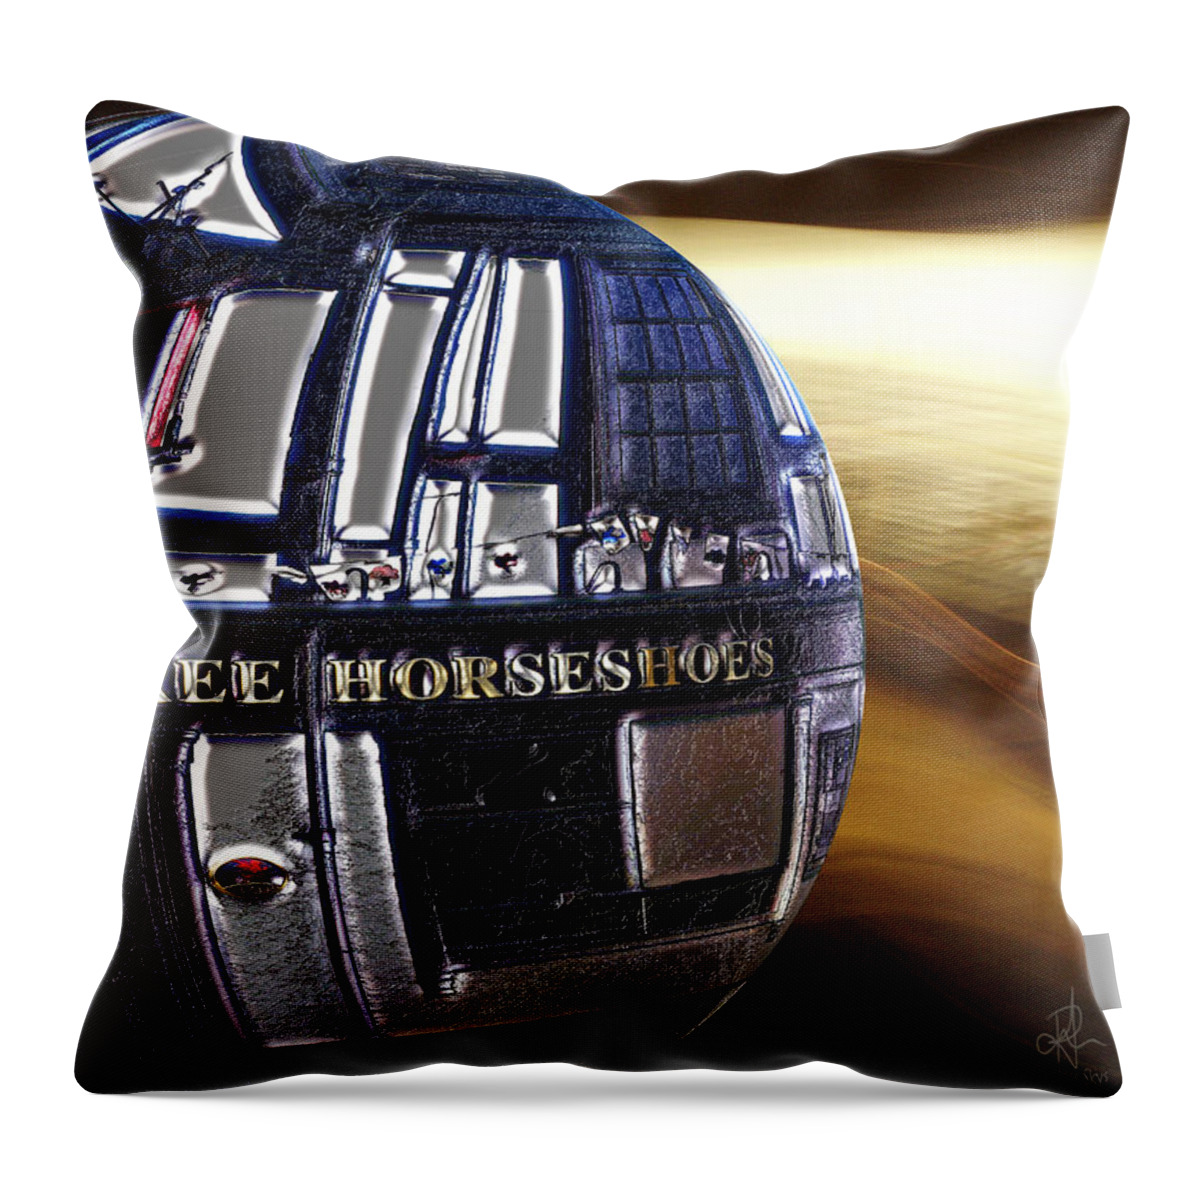 Pub Throw Pillow featuring the photograph Newly Discovered Planet Uranalky by Pennie McCracken